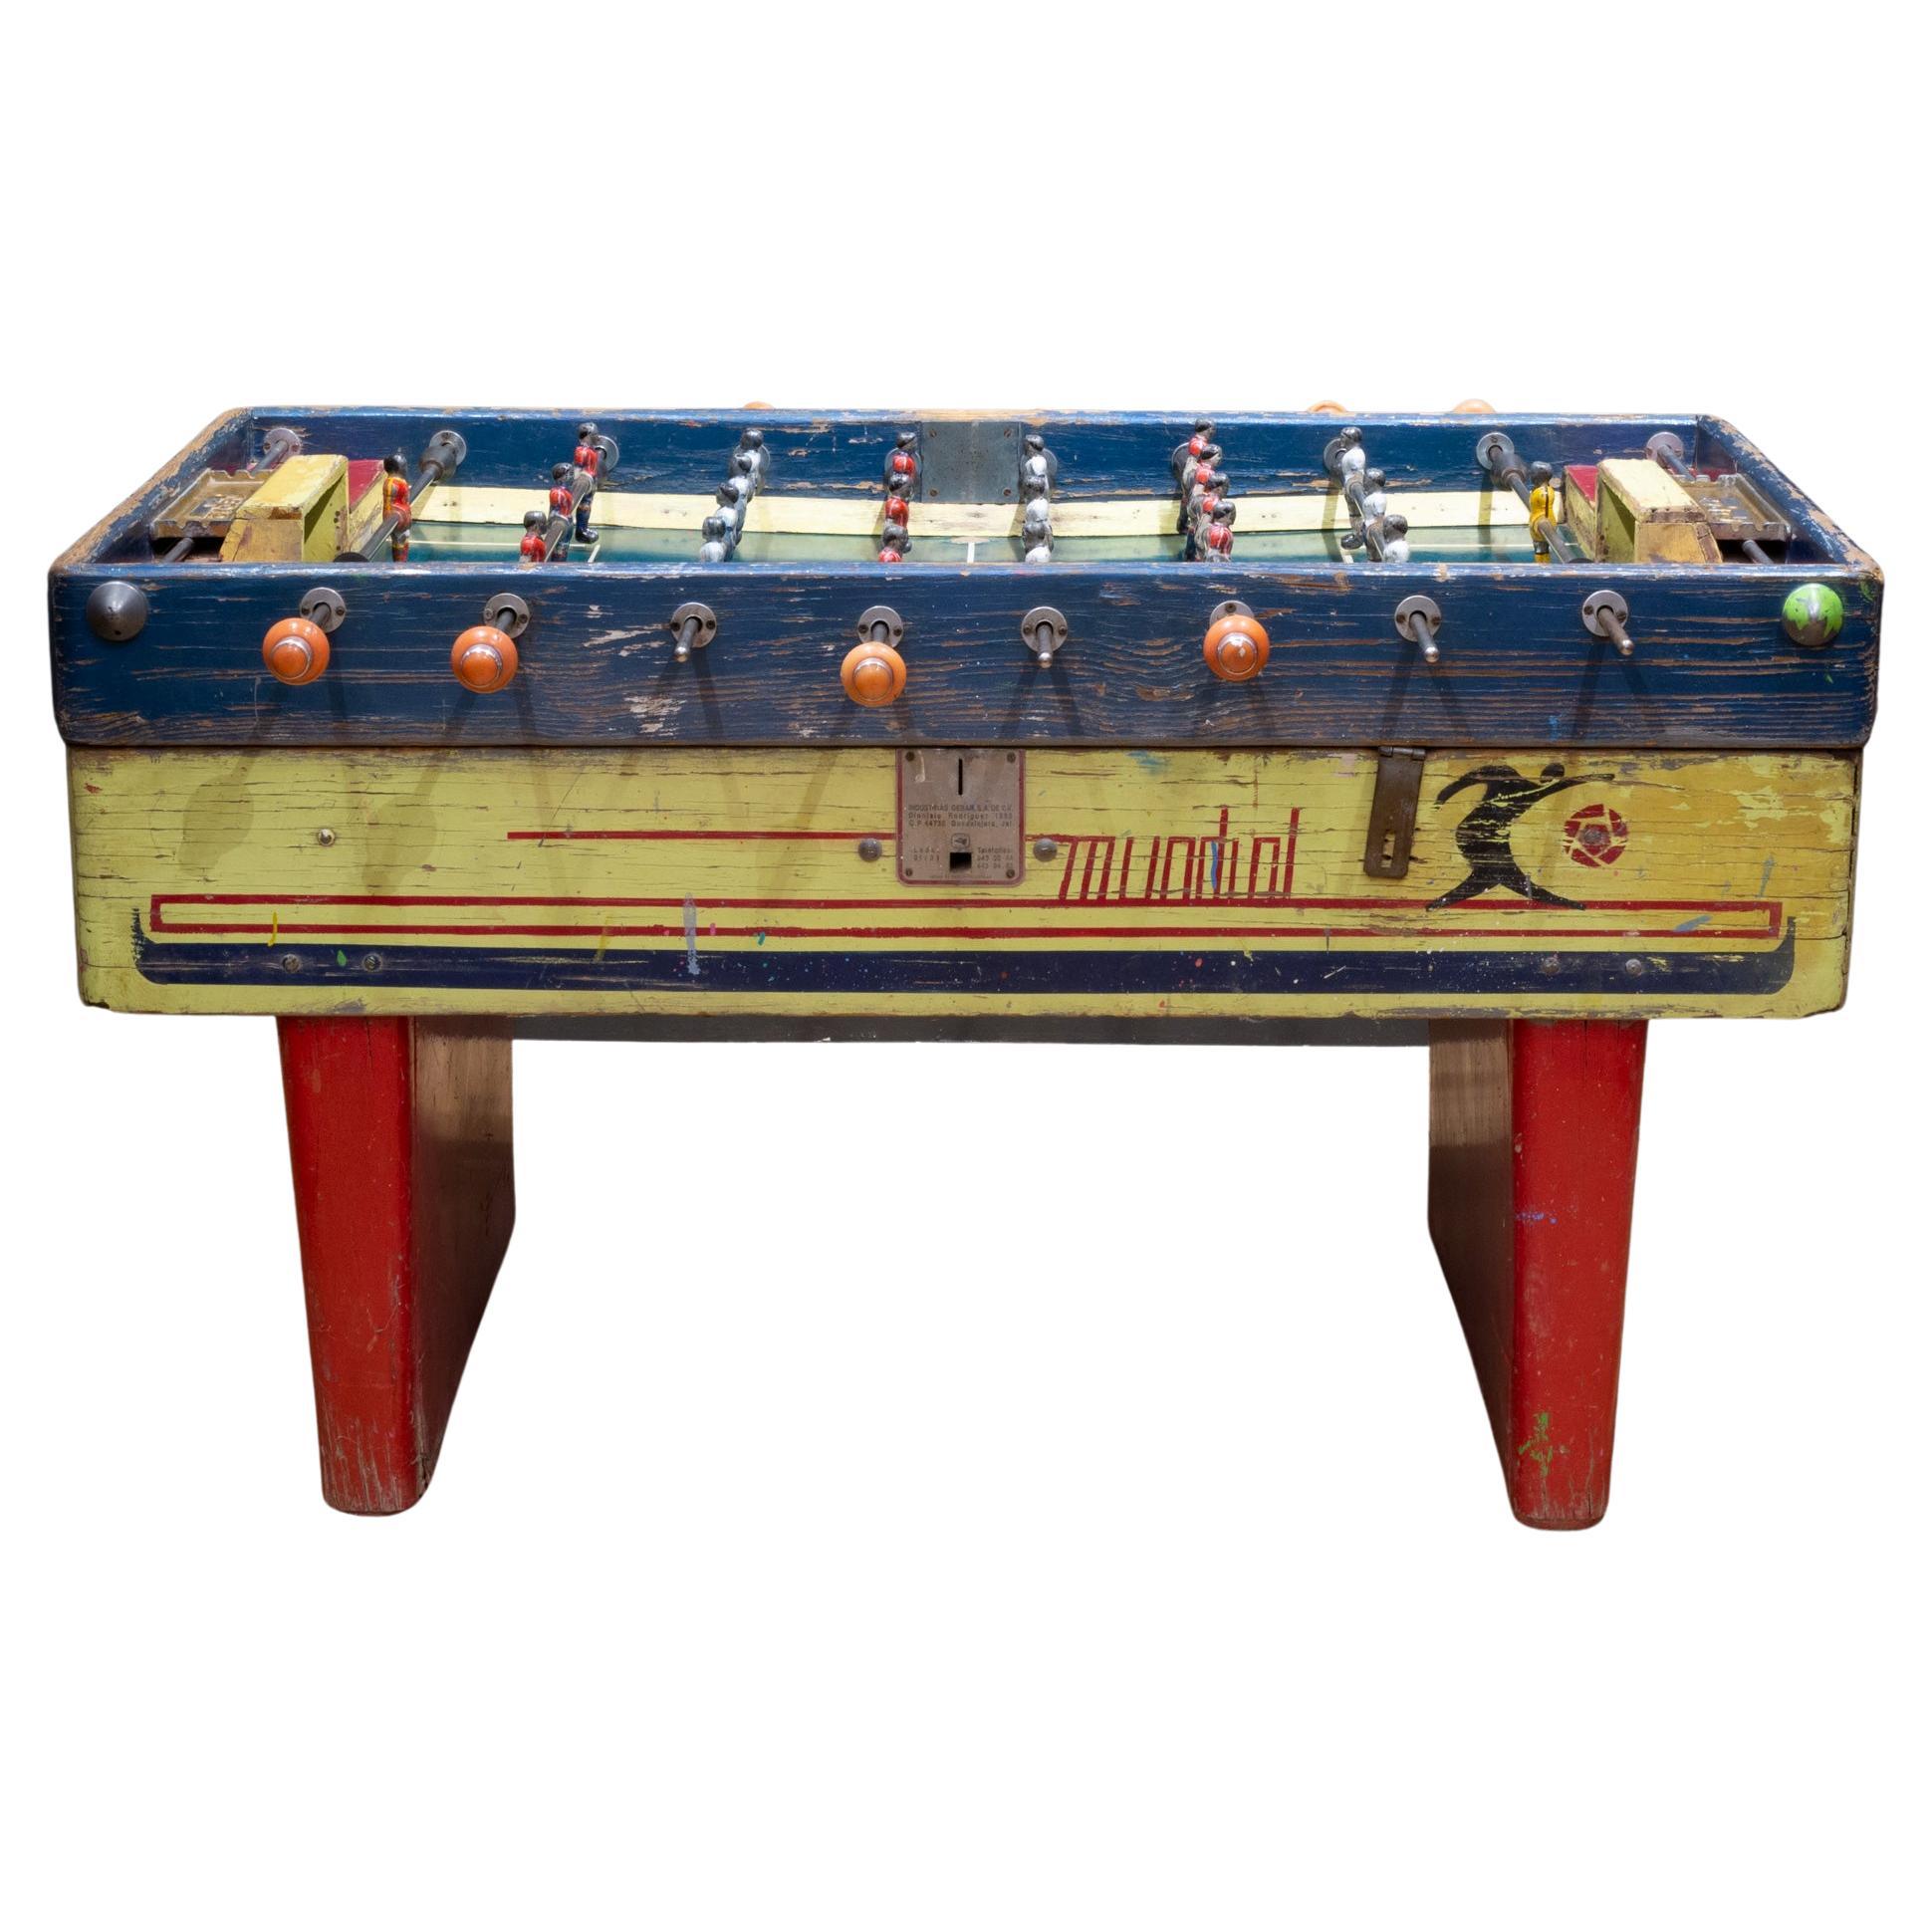 Early 20th Century Mexican Foosball Table with Metal Players, circa 1940